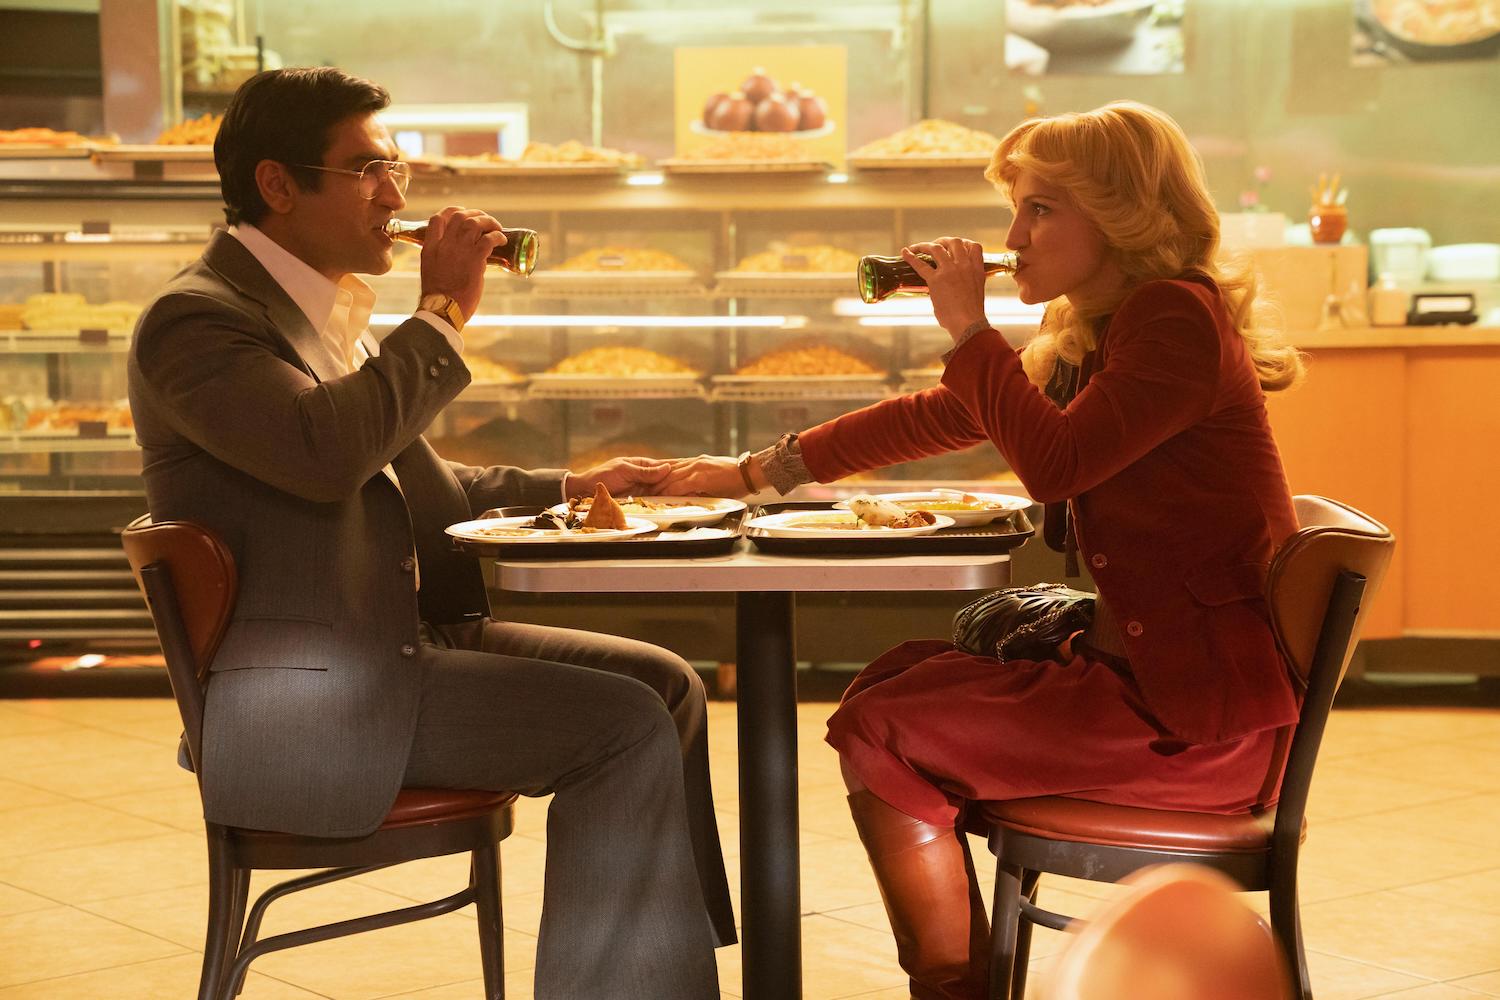 'Welcome to Chippendales' Episode 2 production still of Kumail Nanjiani as Steve Banerjee and Annaleigh Ashford as Irene sitting at a table in a restaurant drinking Coke from bottles.